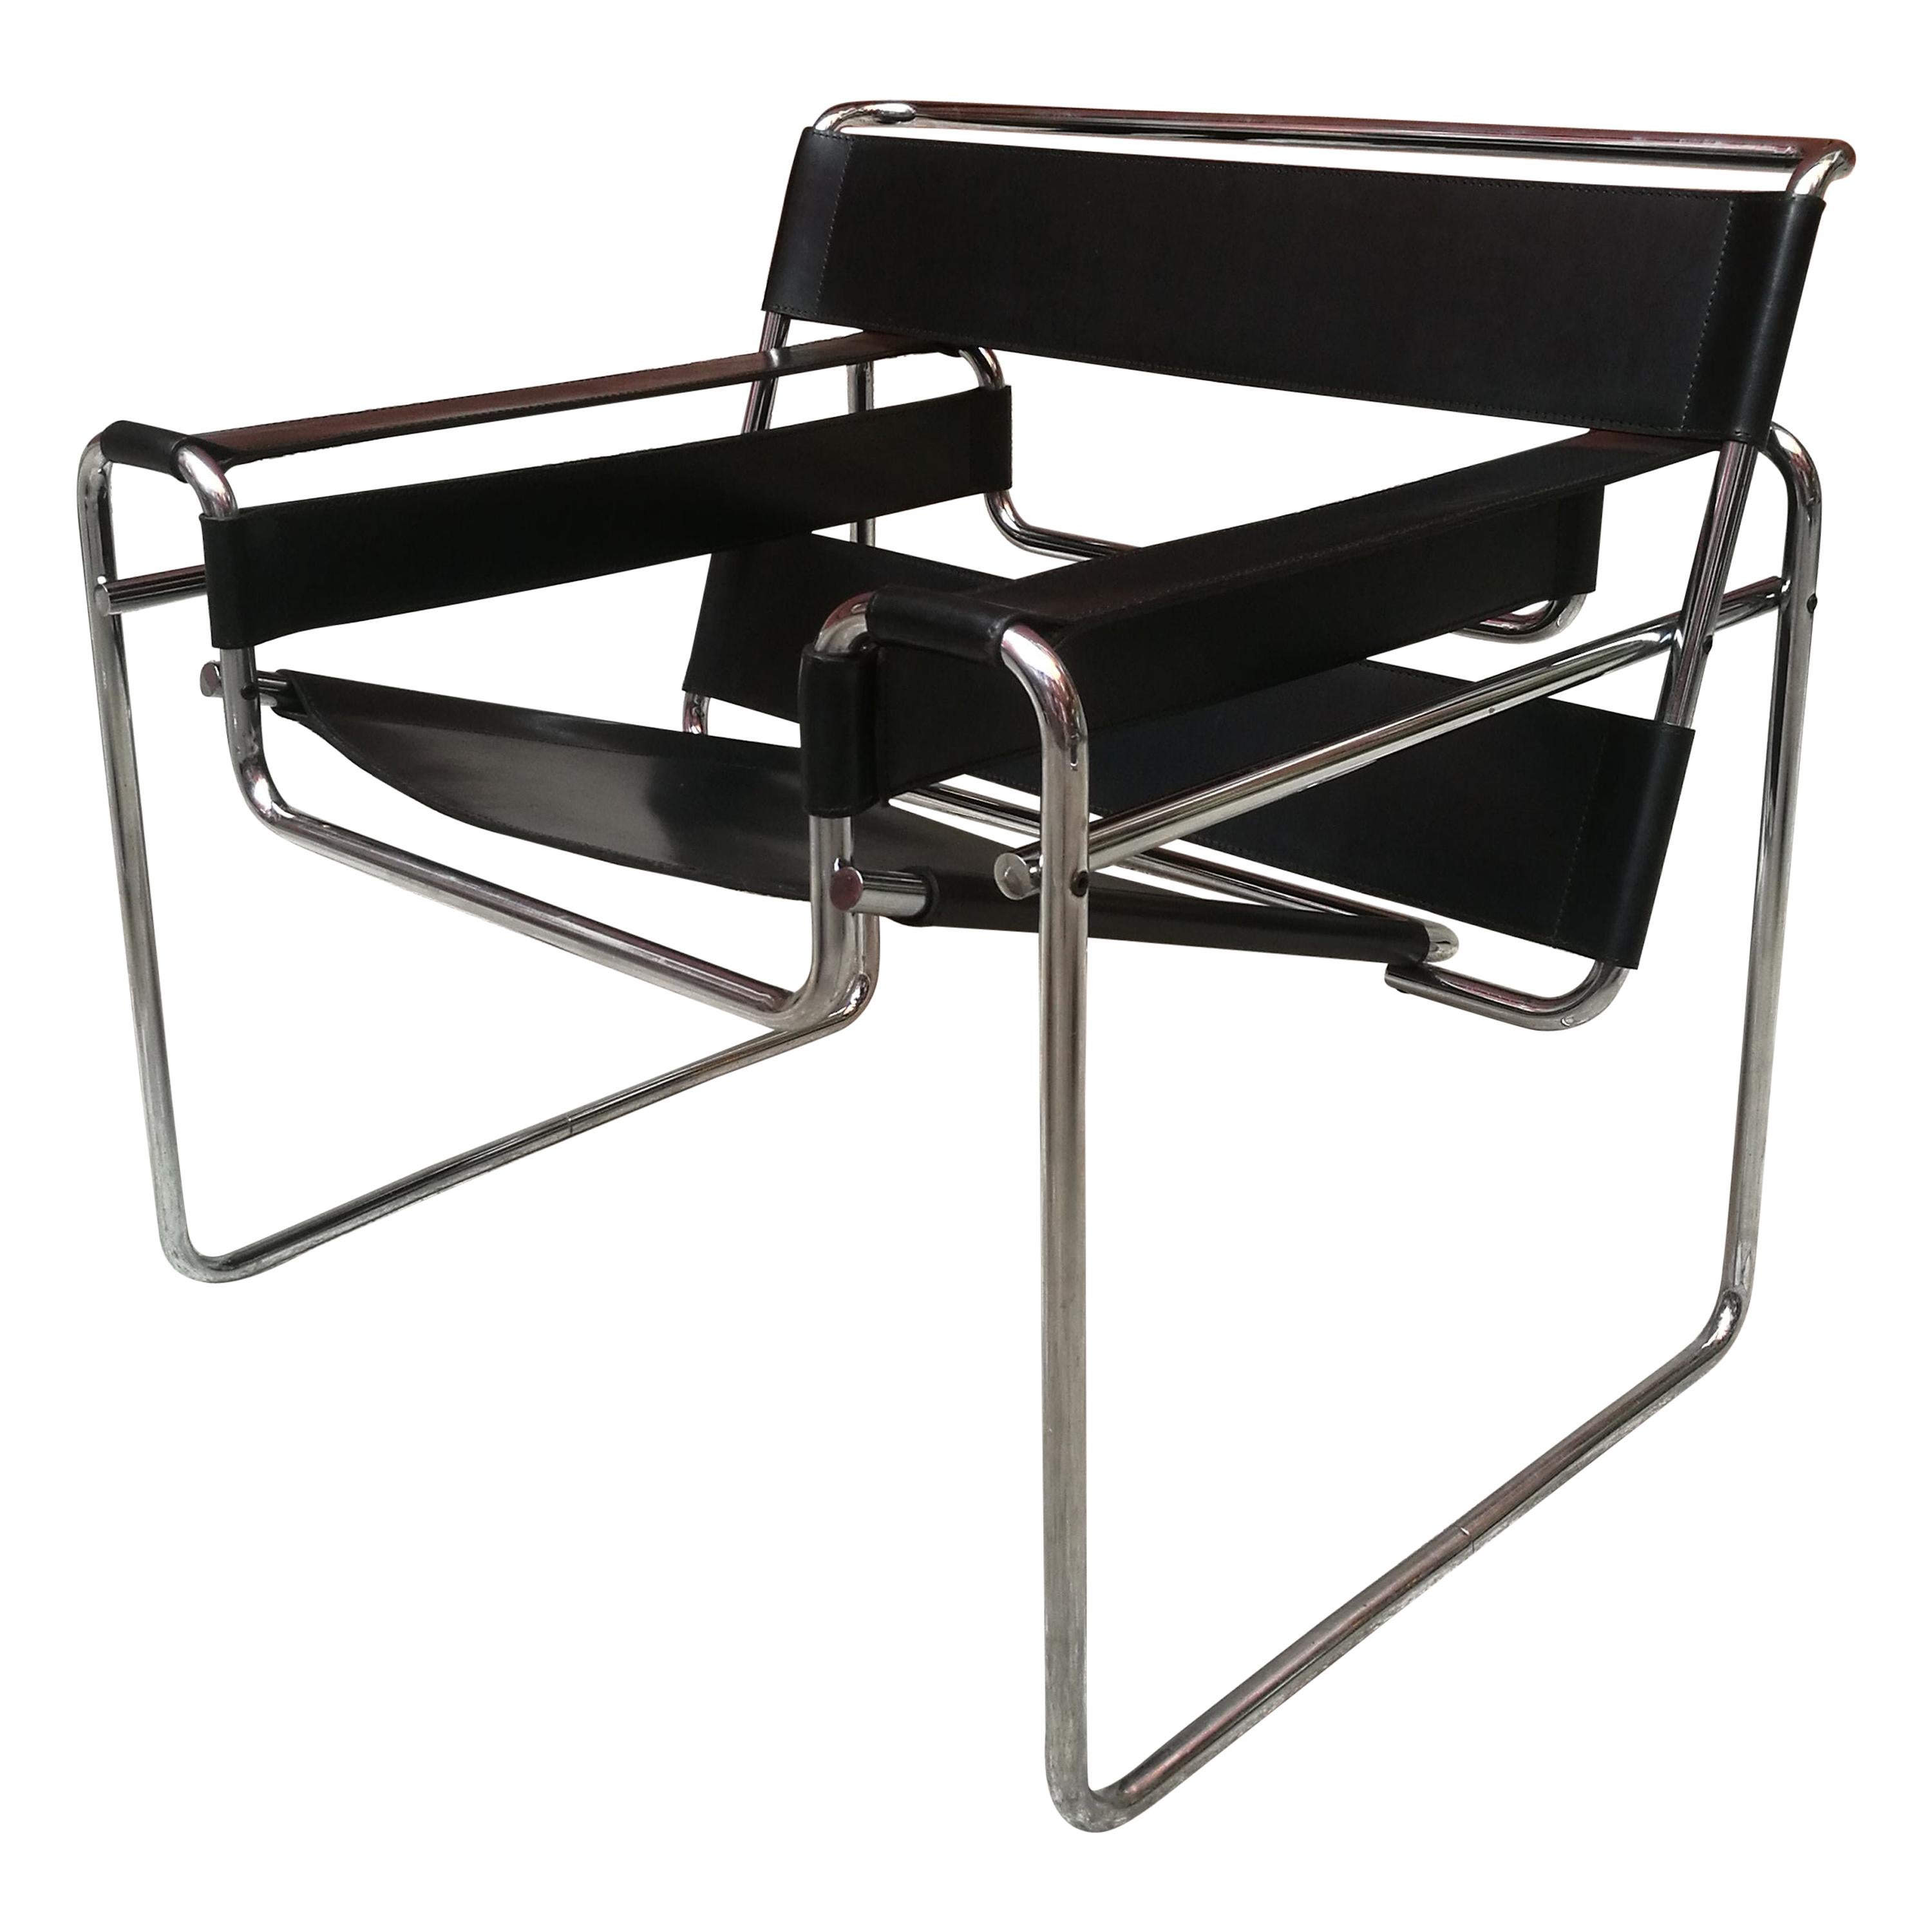 Black Leather Wassily Armchair by Marcel Breuer for Gavina, 1968